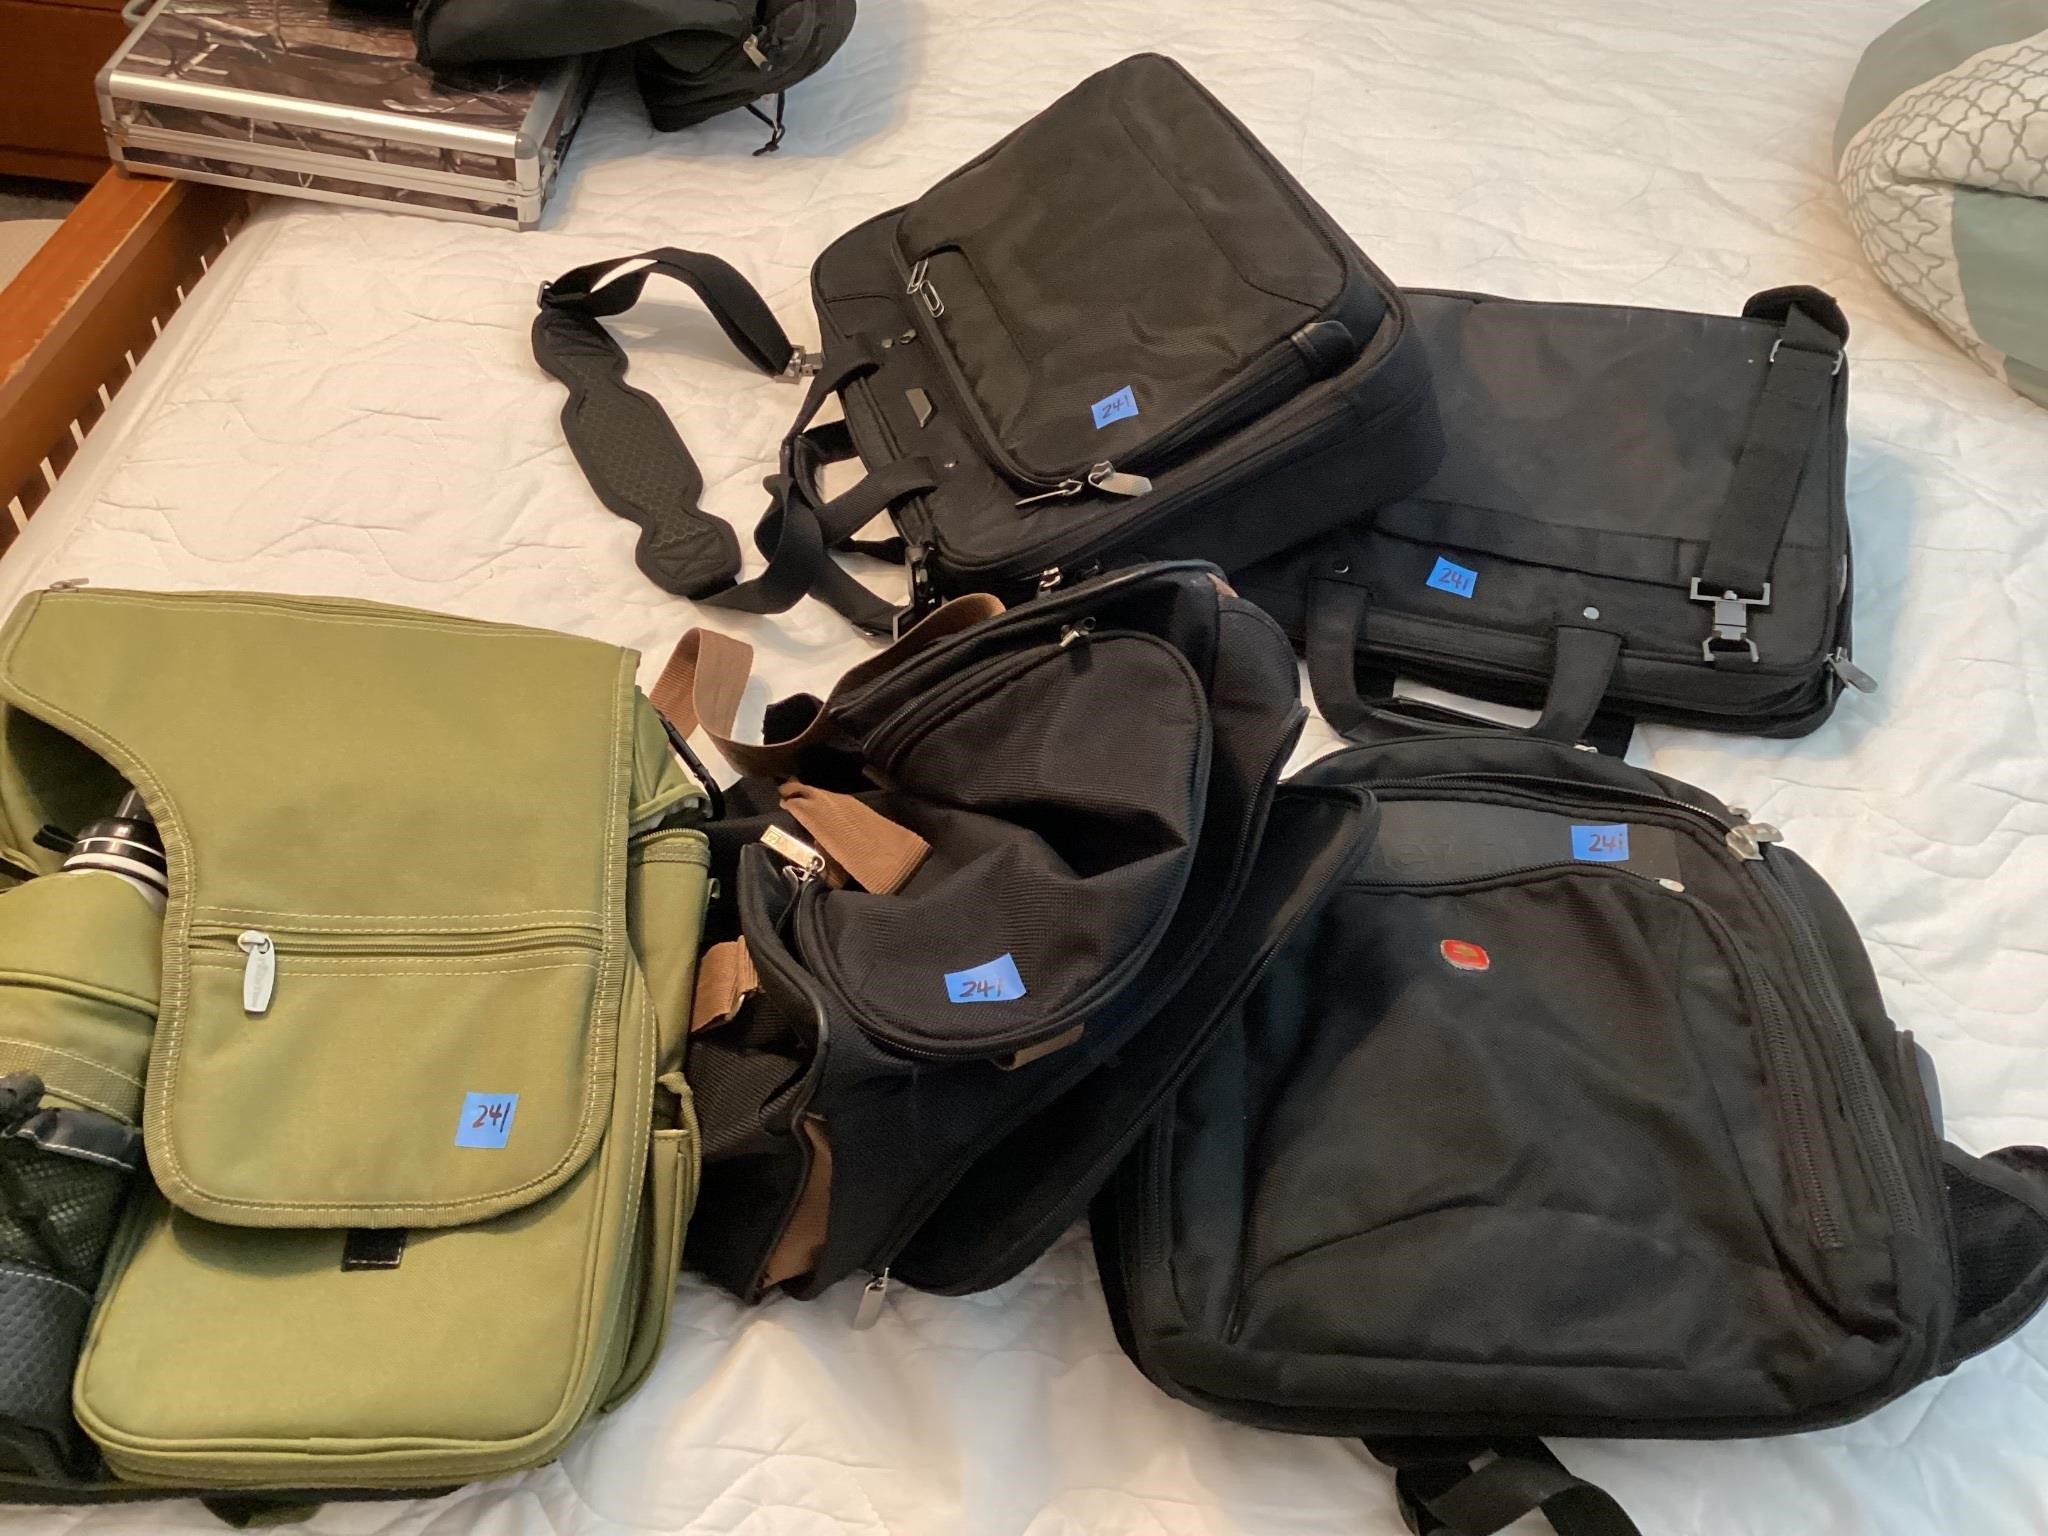 Backpack and computer bags lot